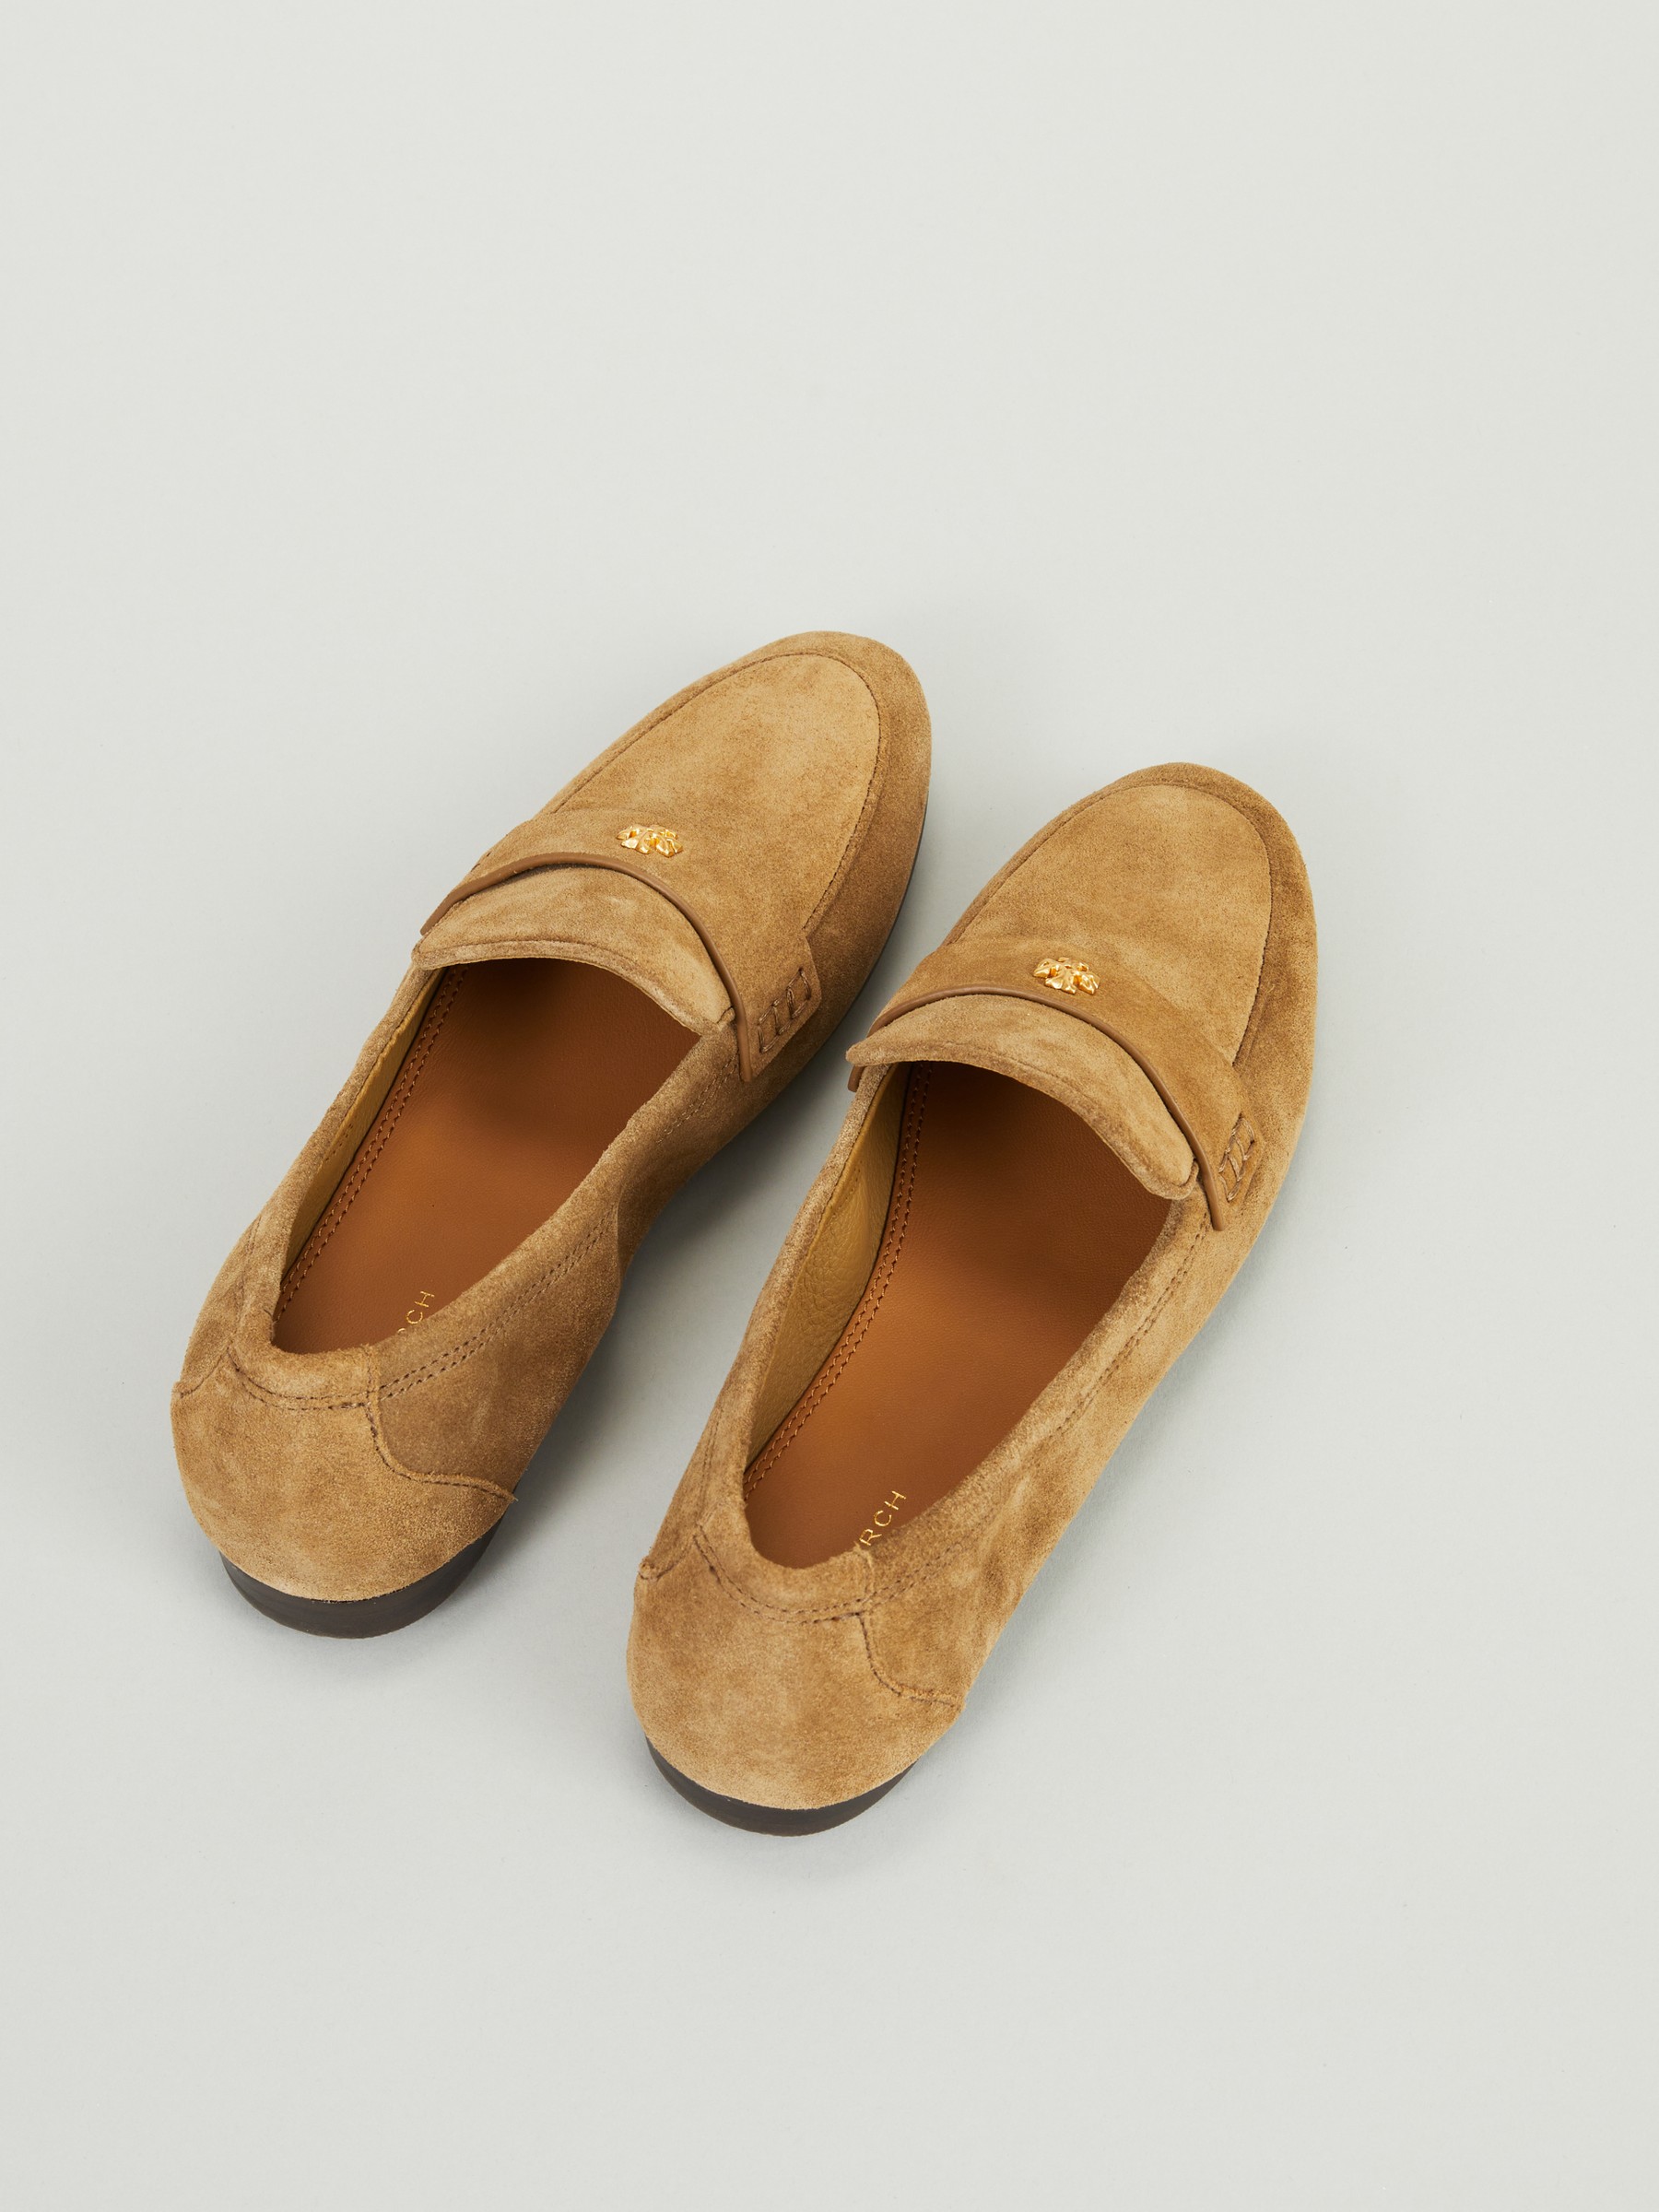 Tory Burch Loafer Brown | Tory Burch